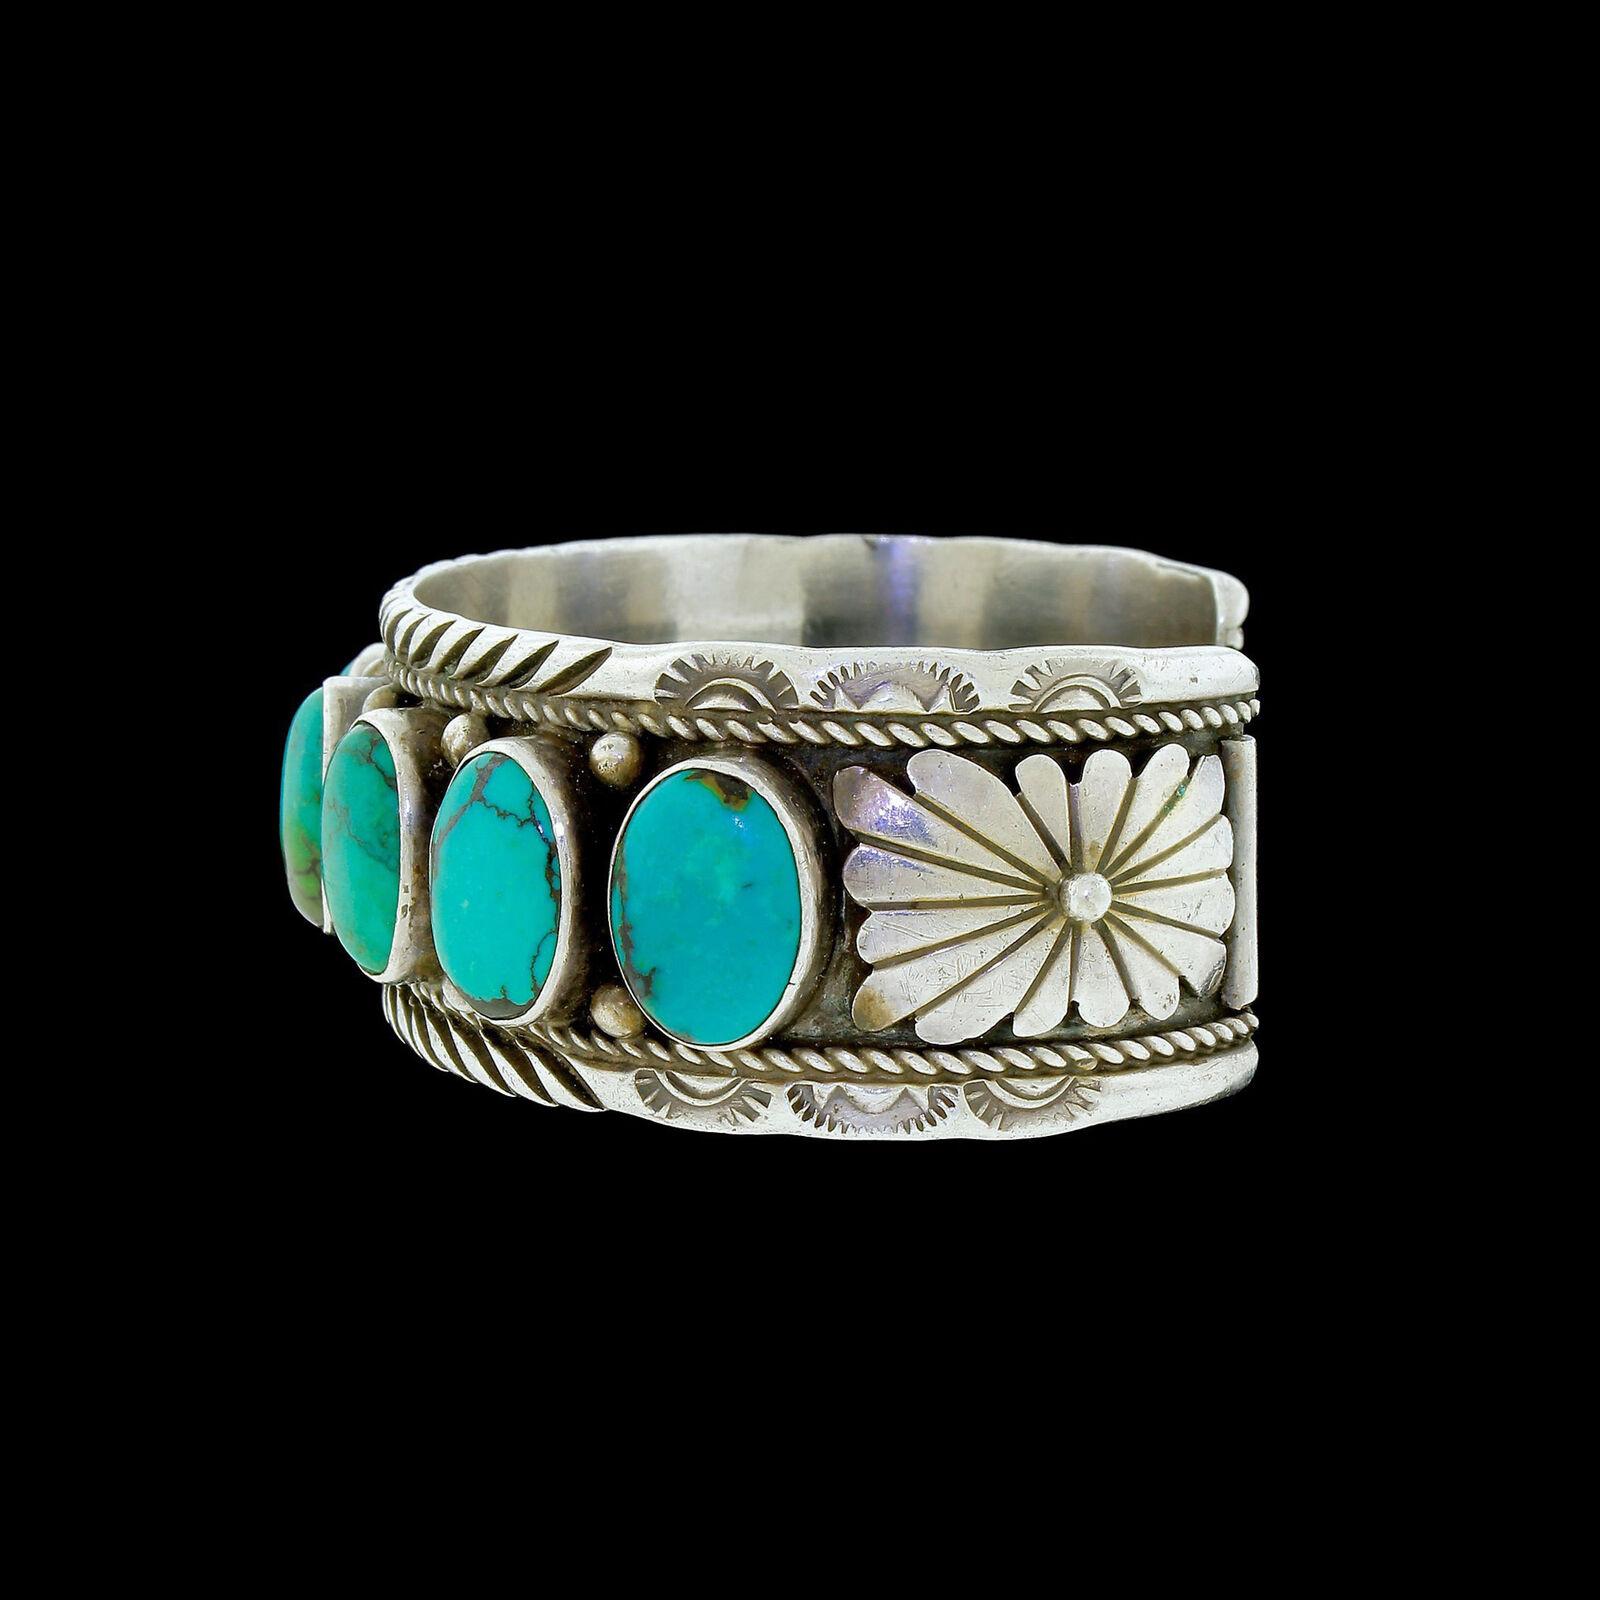 Native American Old Sterling Silver Blue Turquoise Russell Sam Signed Cuff Bracelet Navajo 57.6g